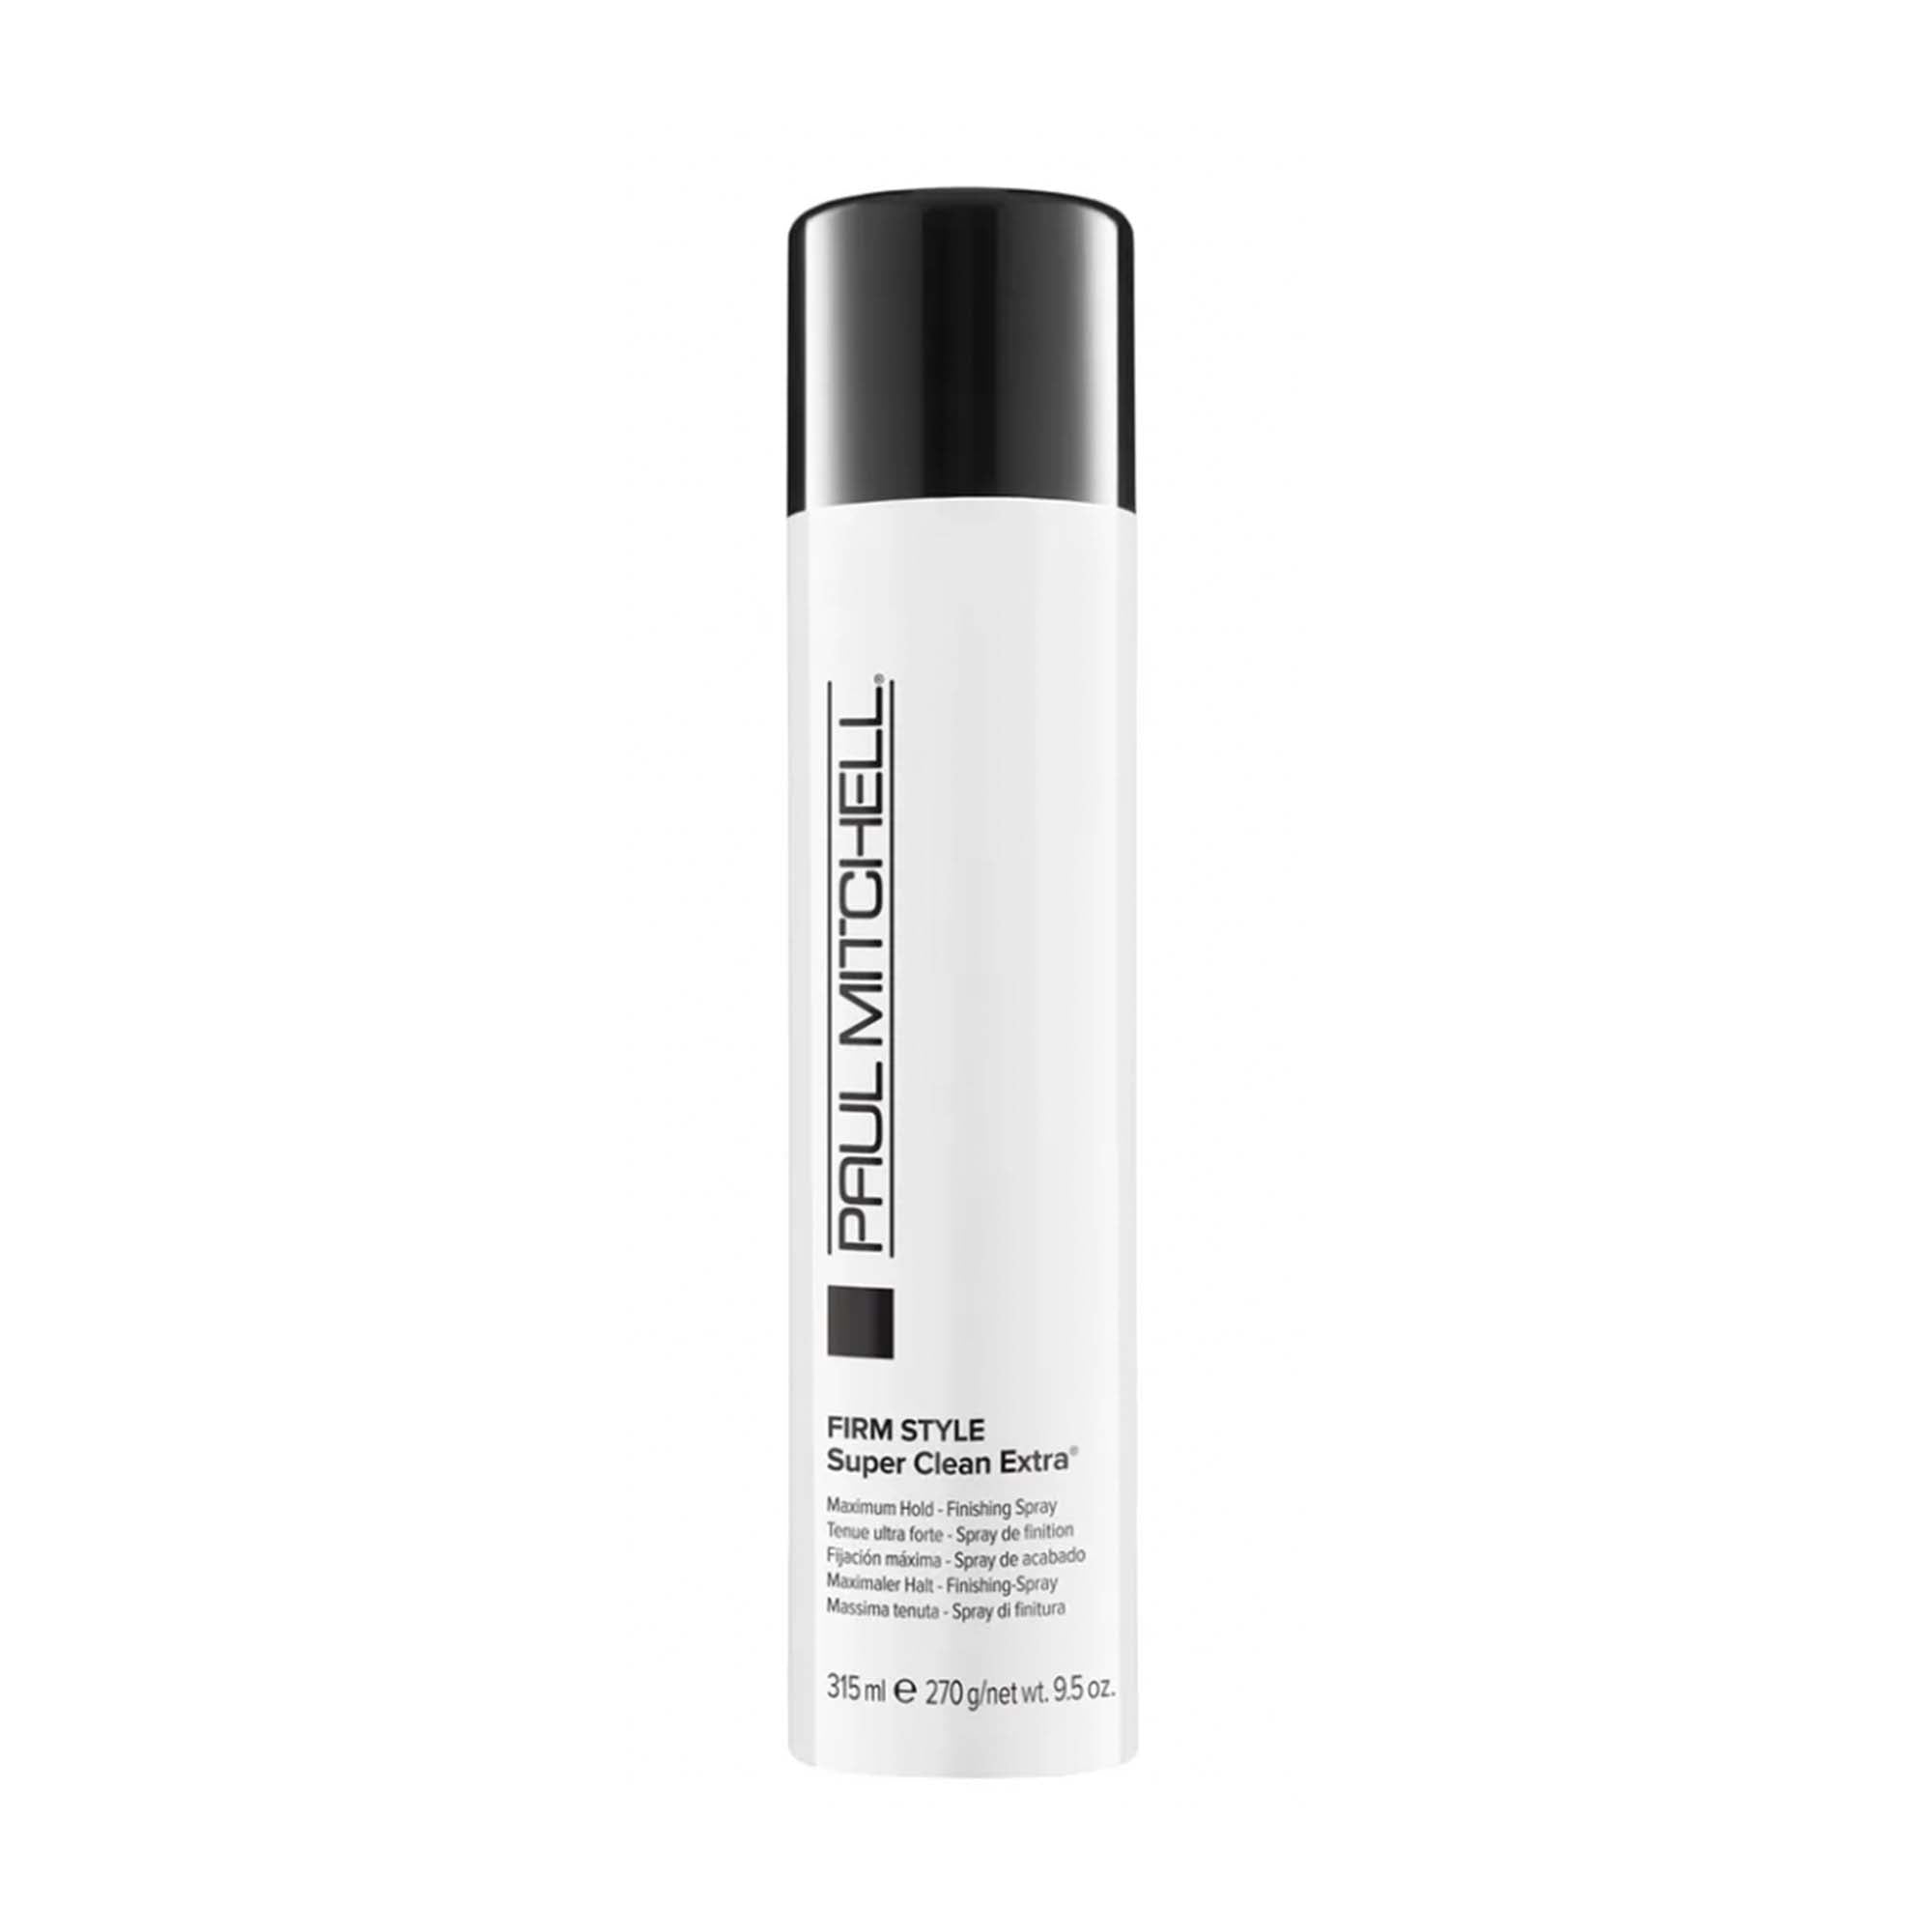 Paul Mitchell Firm Style Super Clean Extra 9.5oz